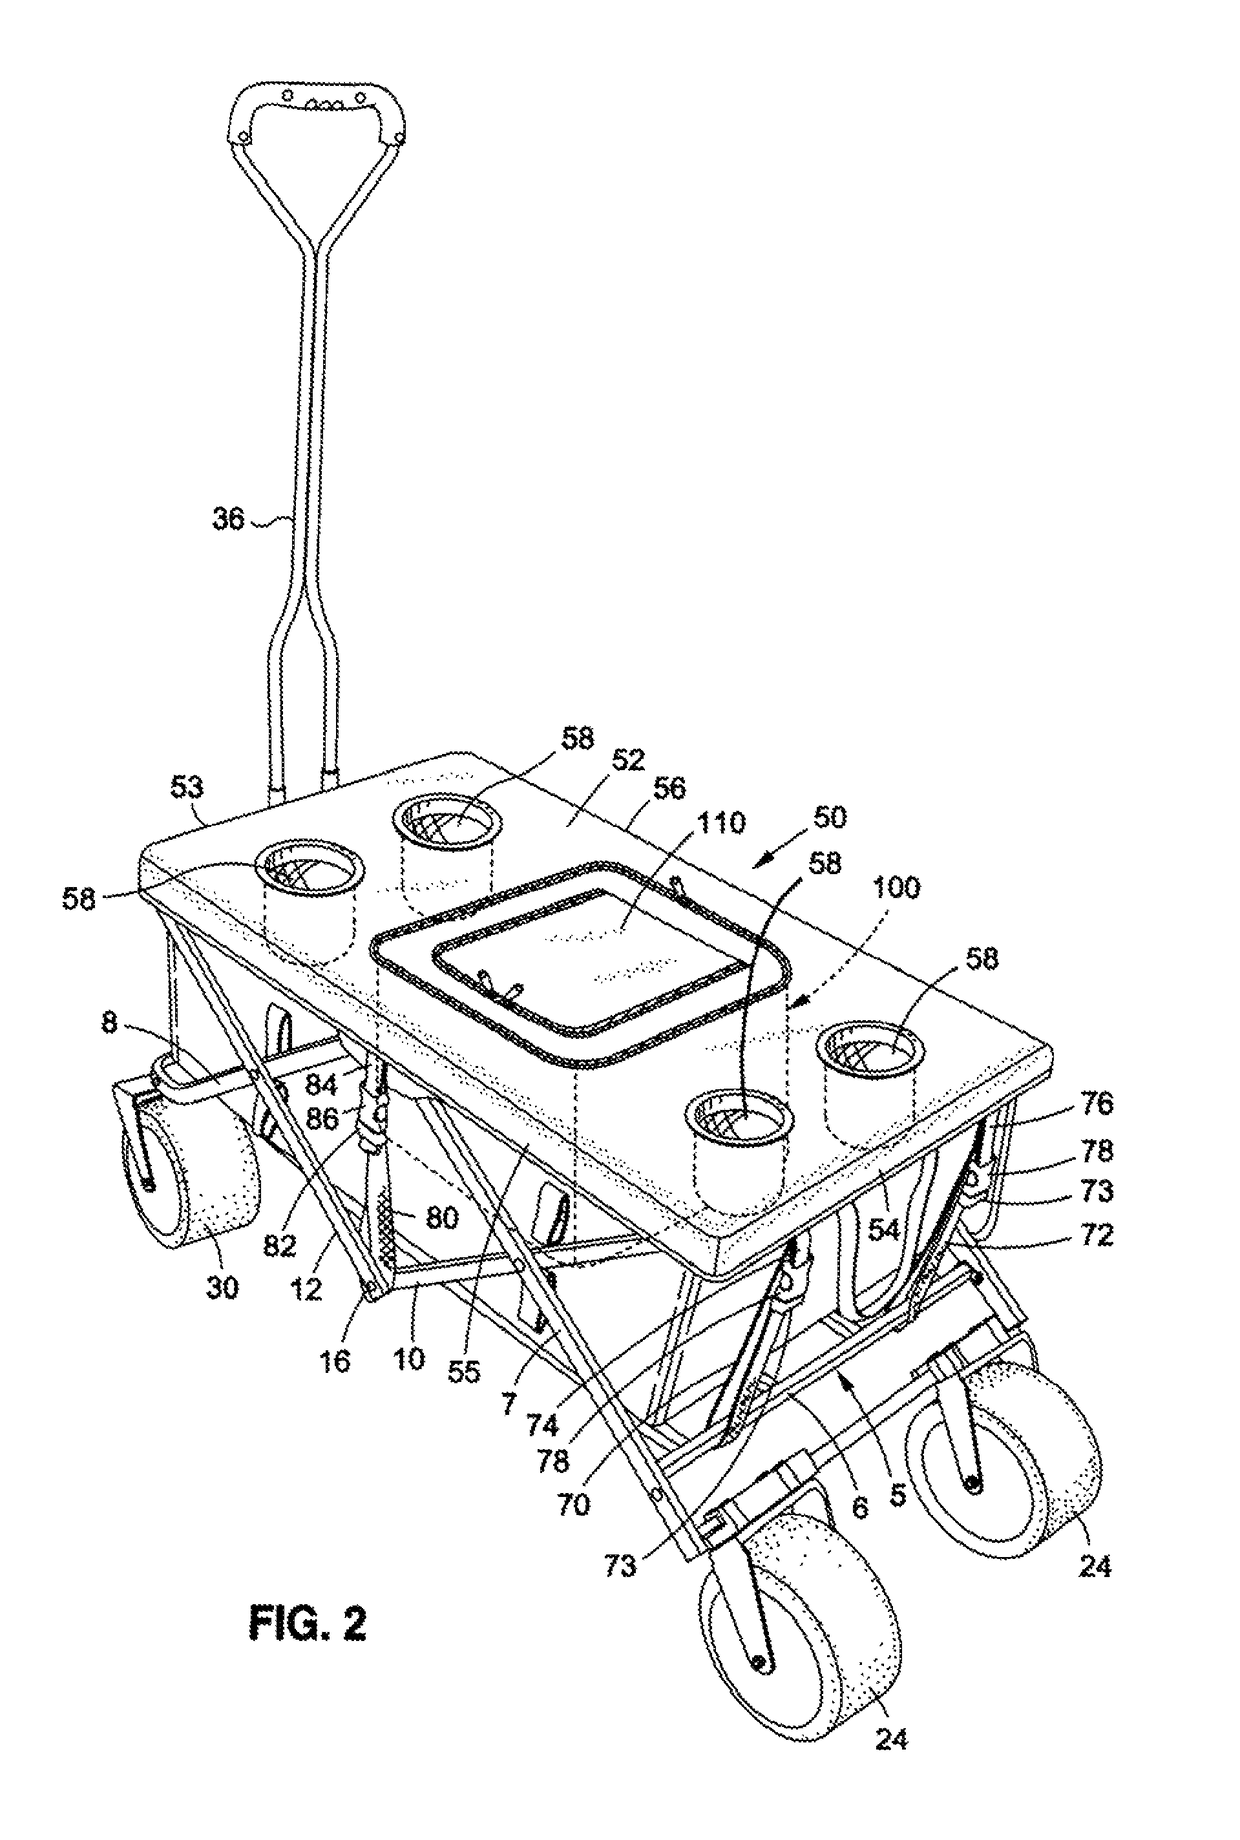 Folding wagon having a cooler and a removable table connected thereto